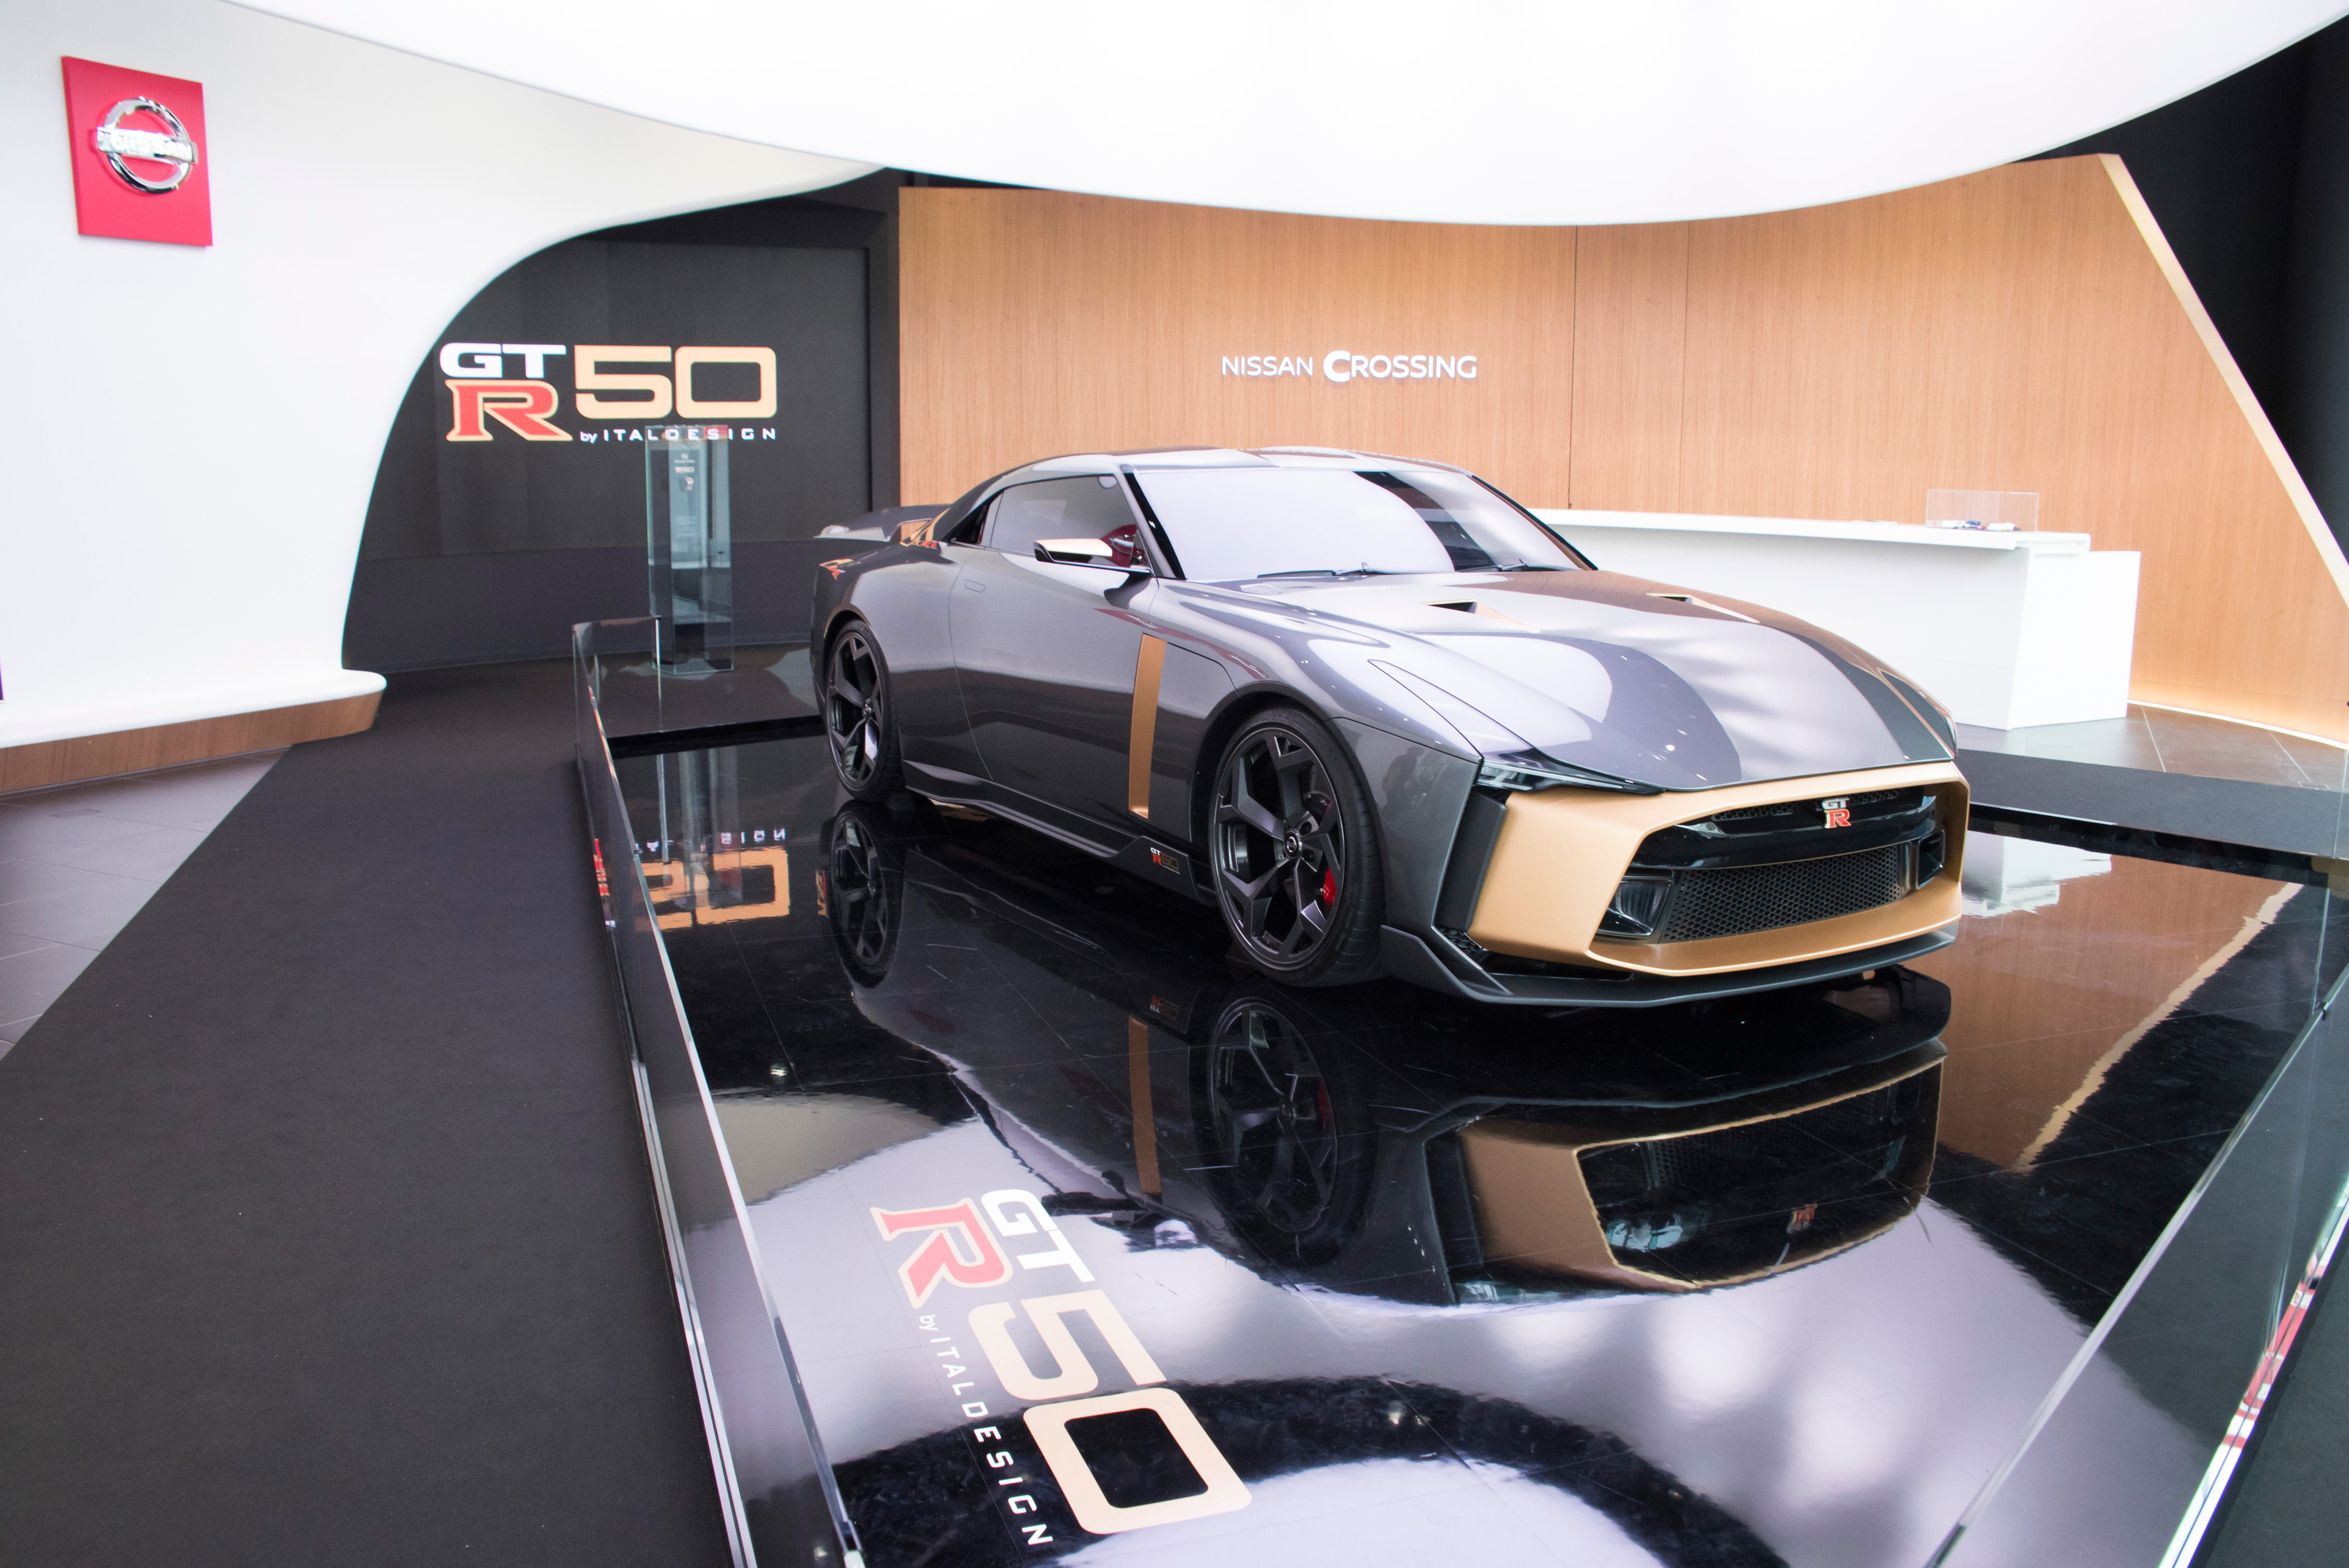 「Nissan GT-R50 by Italdesign」東京・銀座のNISSAN CROSSINGにて期間限定展示